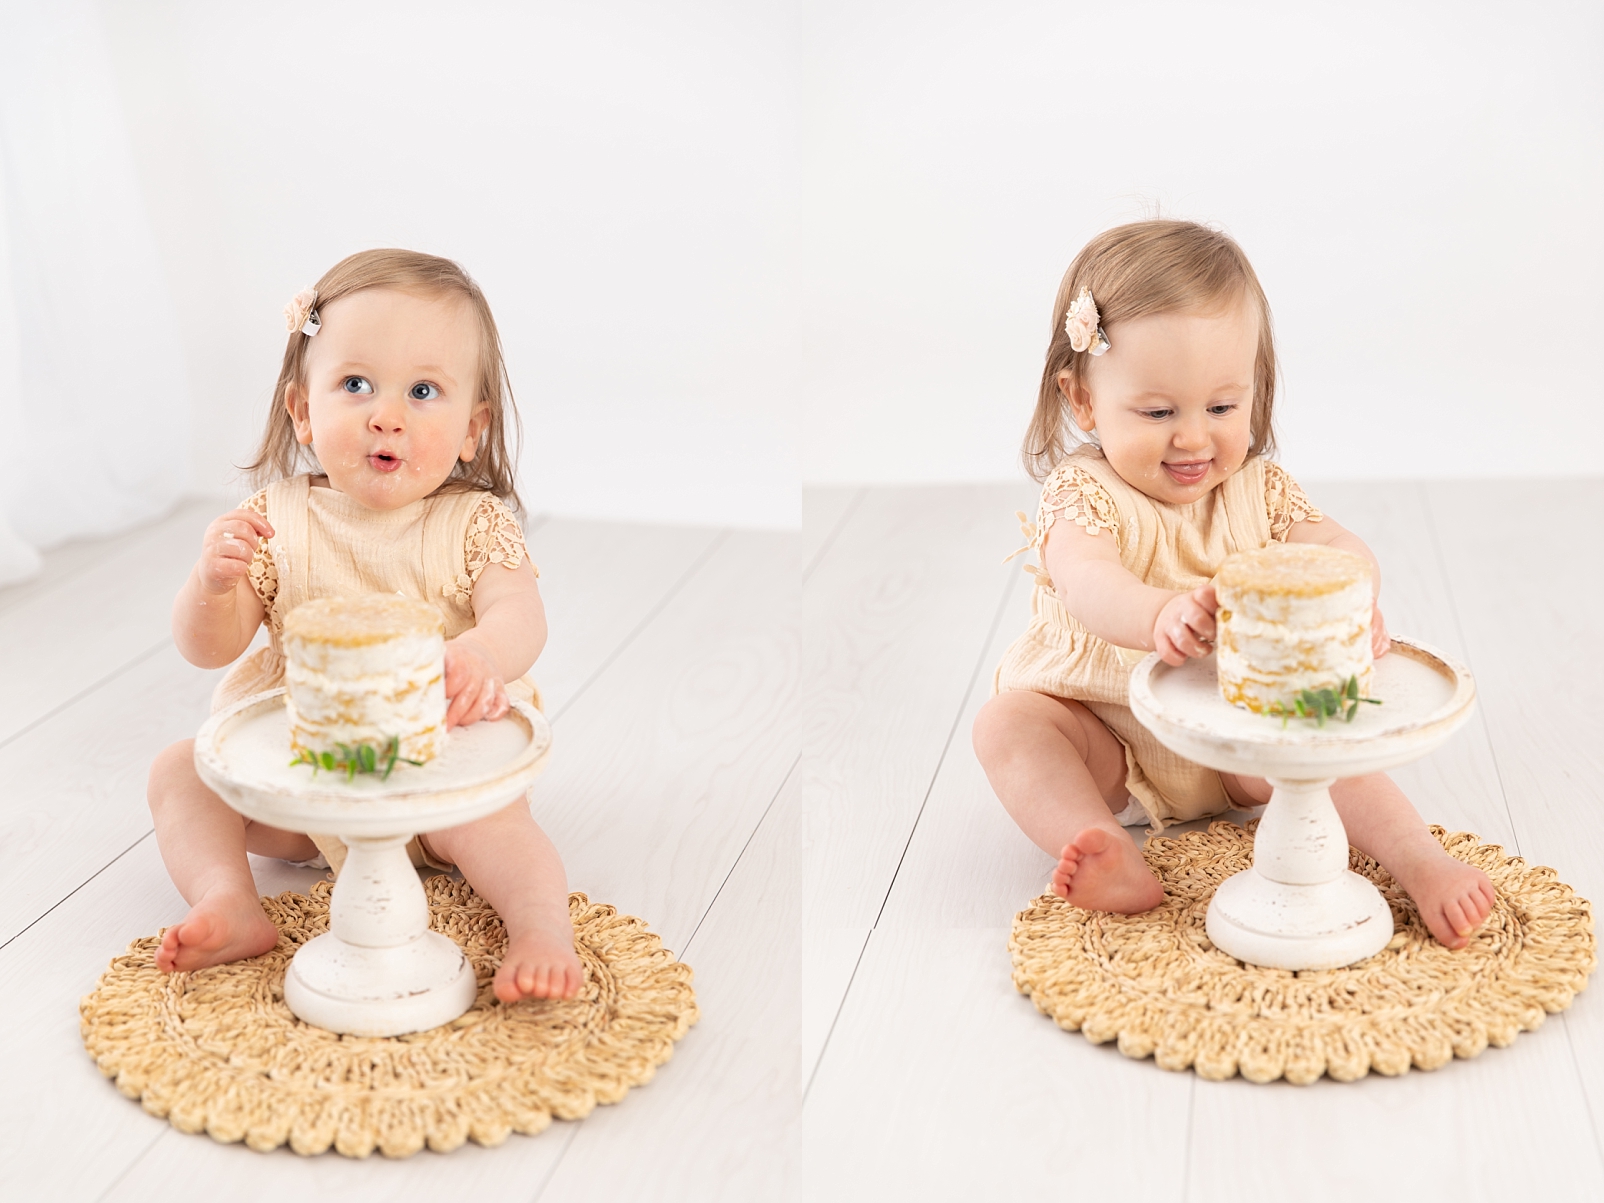 baby girl eating a cake on a cake stand for first birthday portraits

